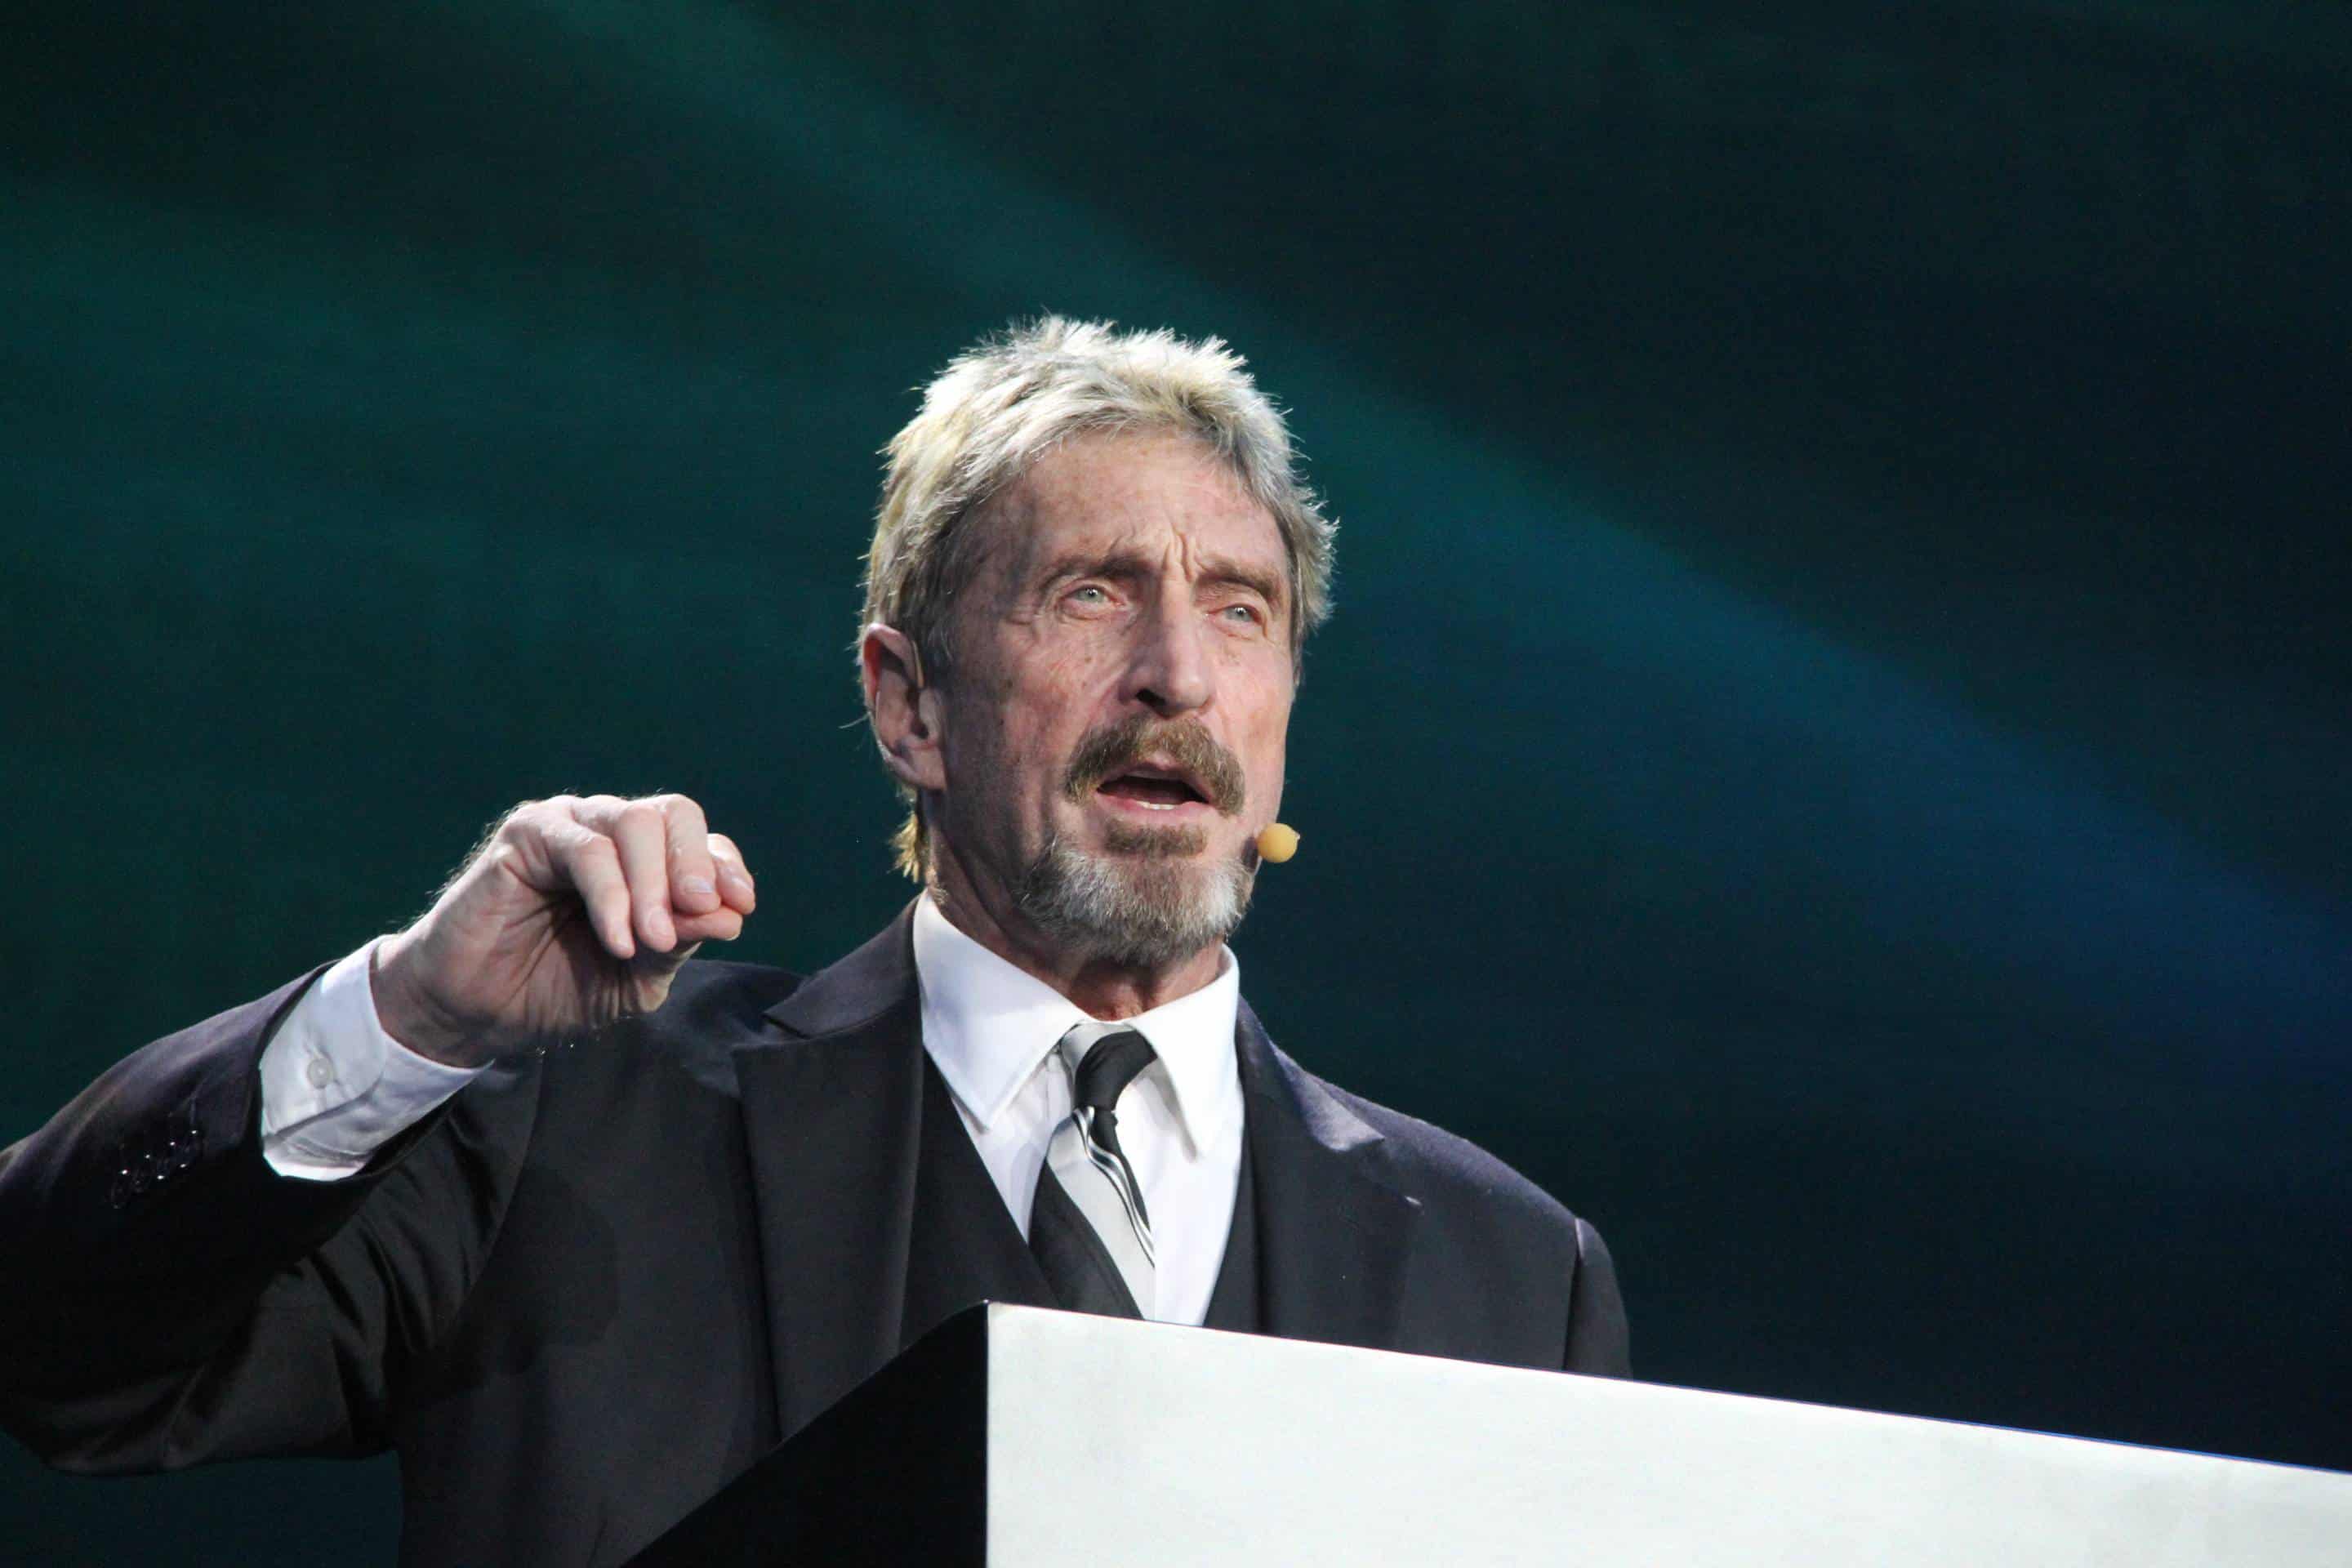 John Mcafee to Launch DEX, With "No fees for Listing"